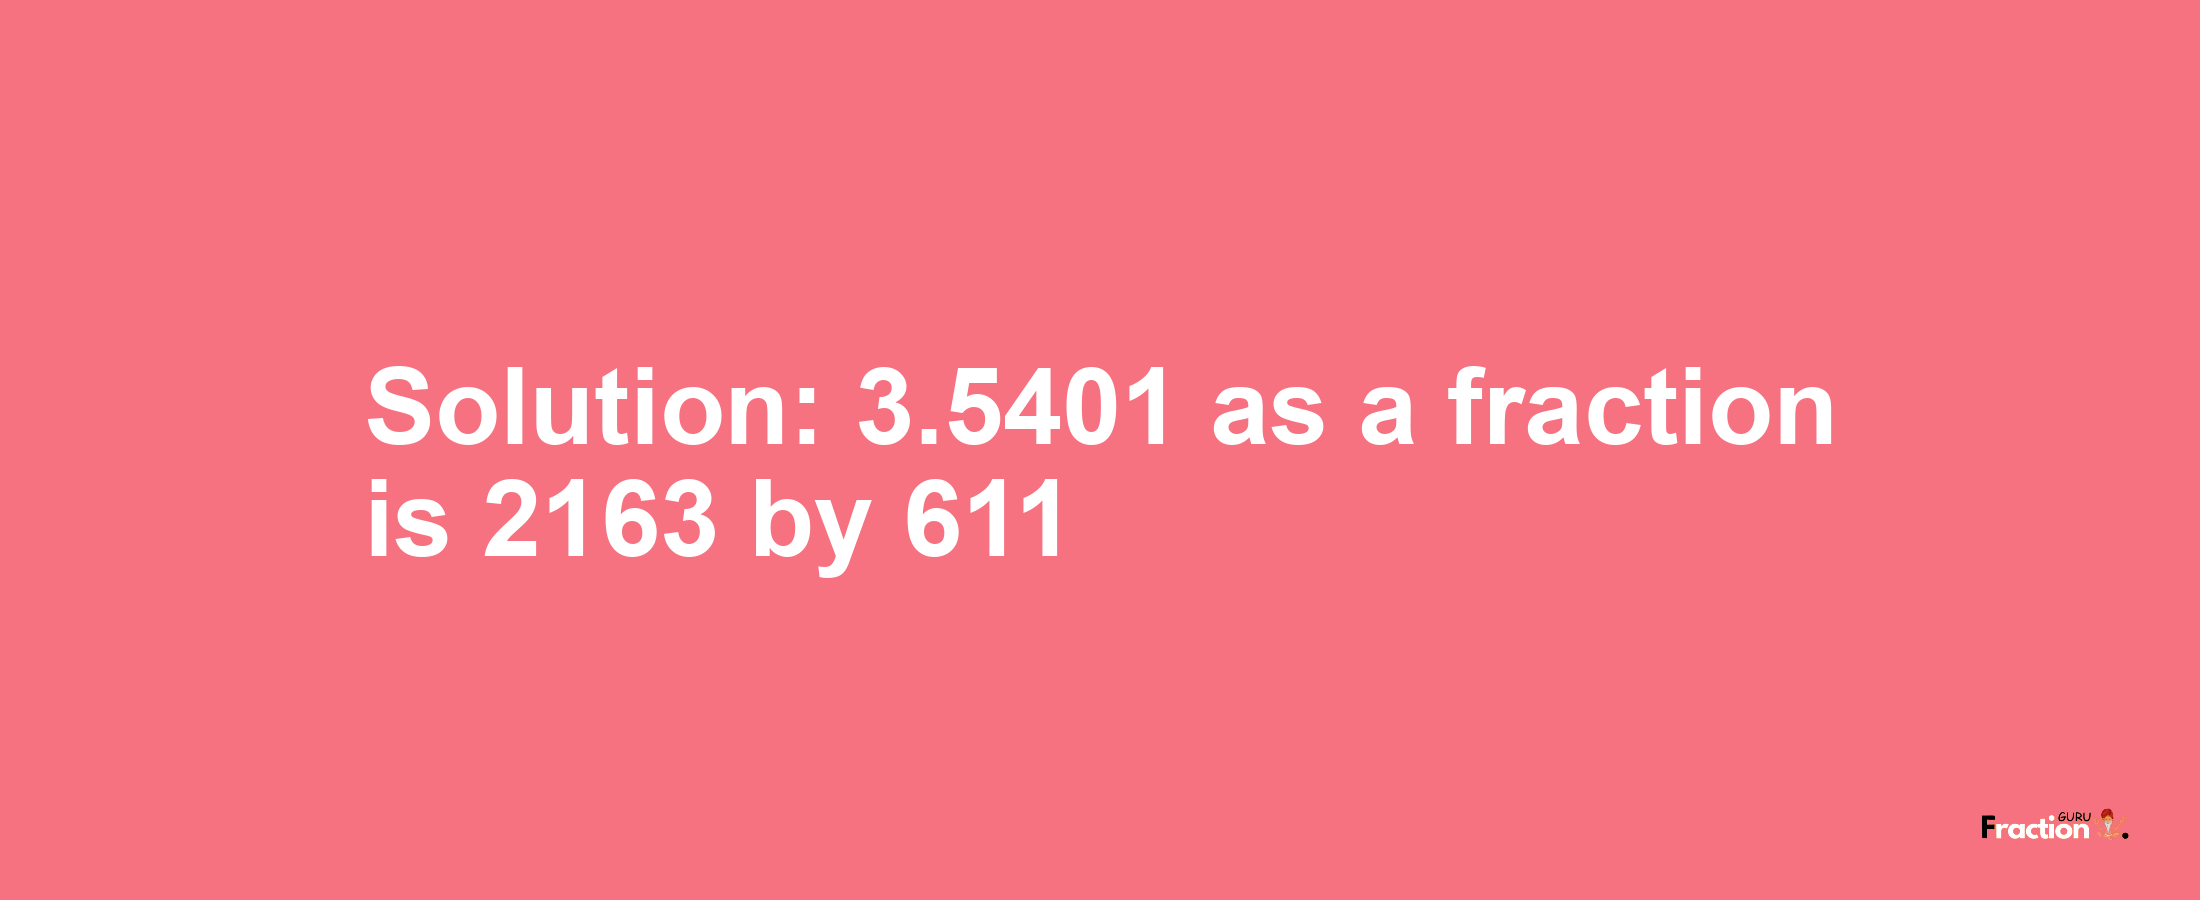 Solution:3.5401 as a fraction is 2163/611